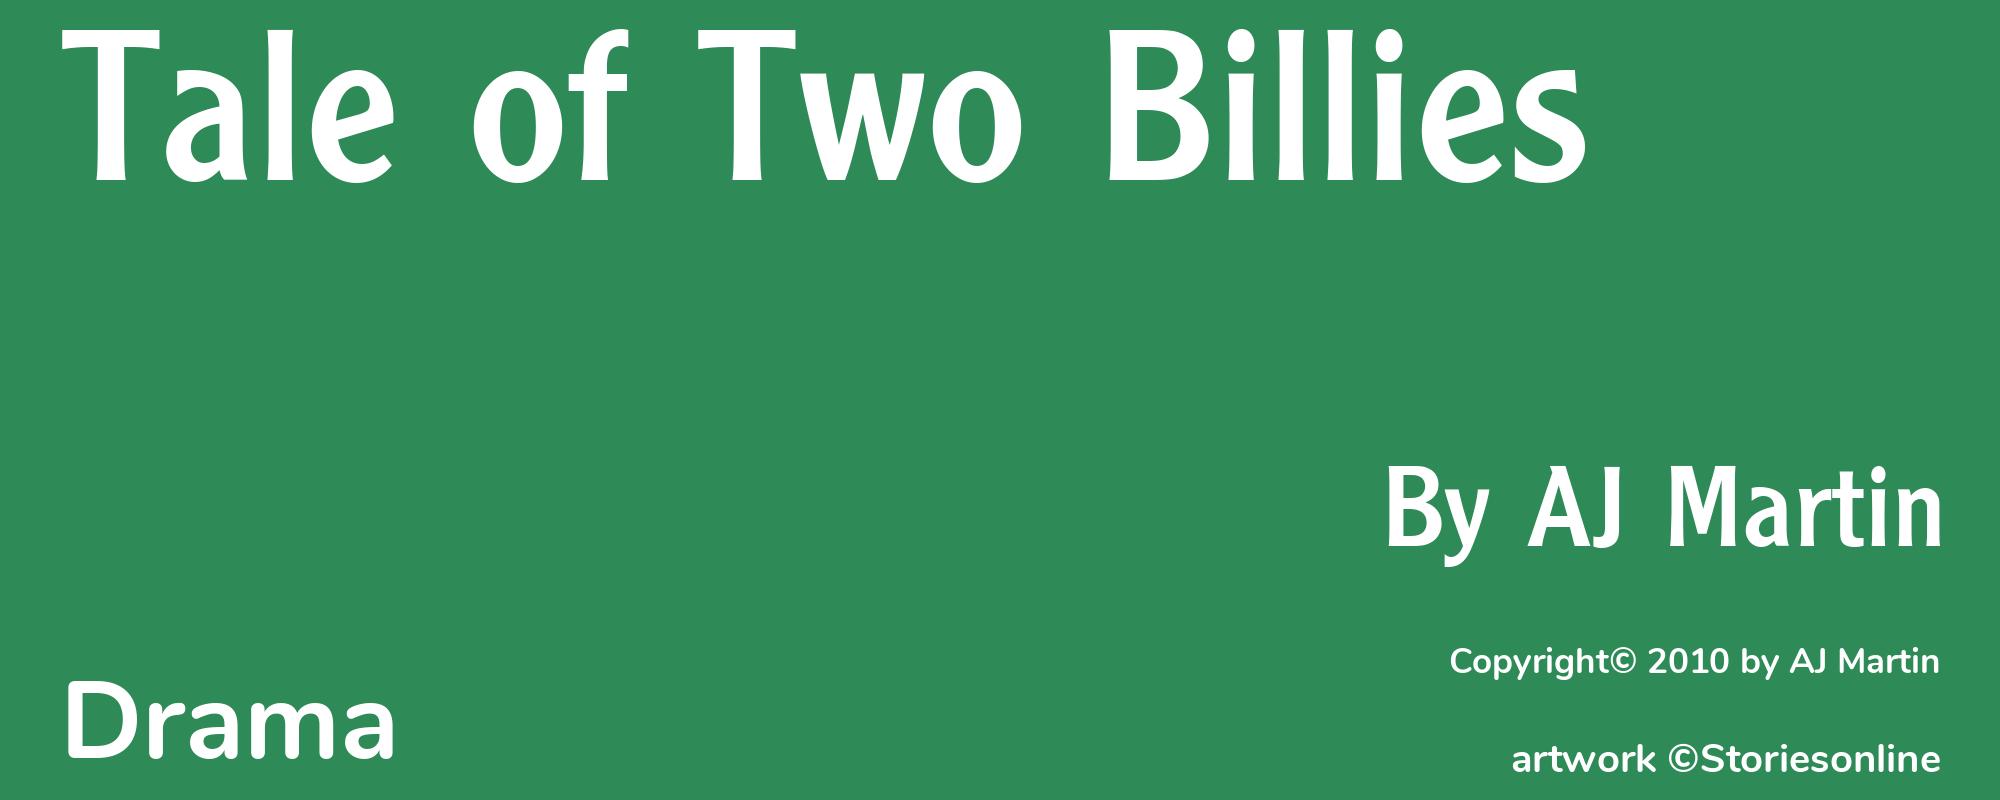 Tale of Two Billies - Cover